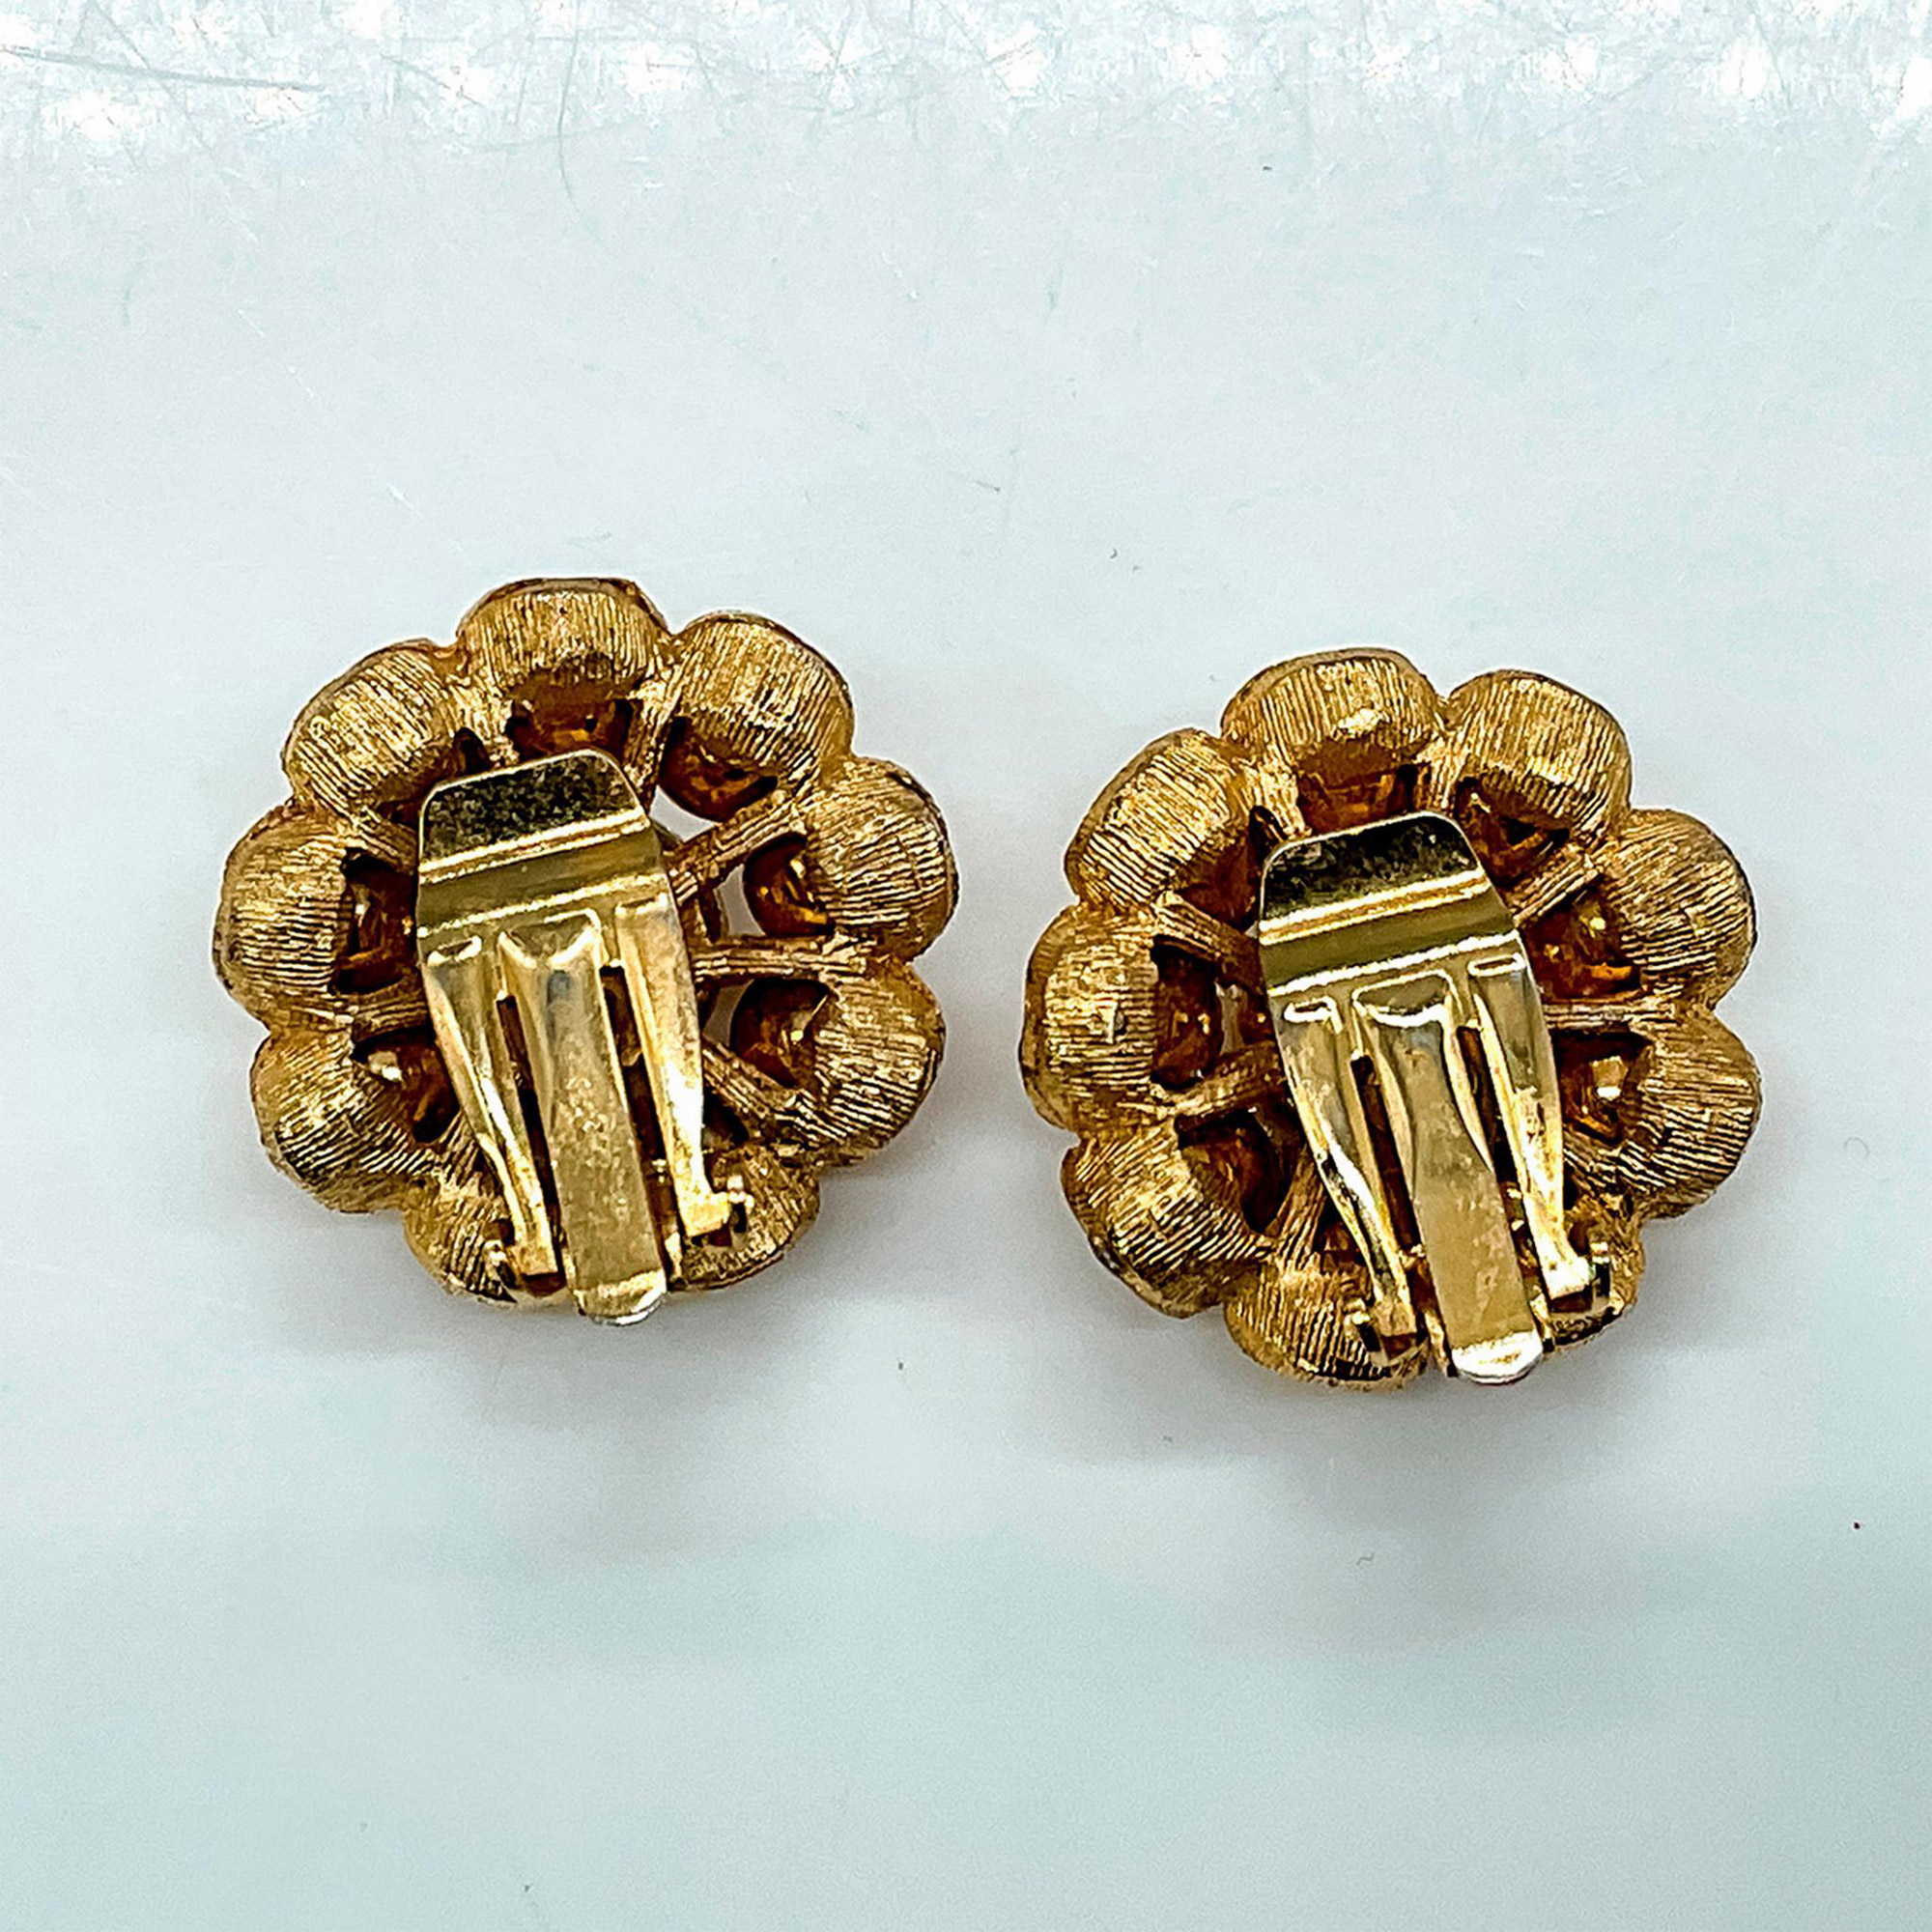 Vintage Gold Tone Floral Cluster Clip On Earrings - Image 2 of 2